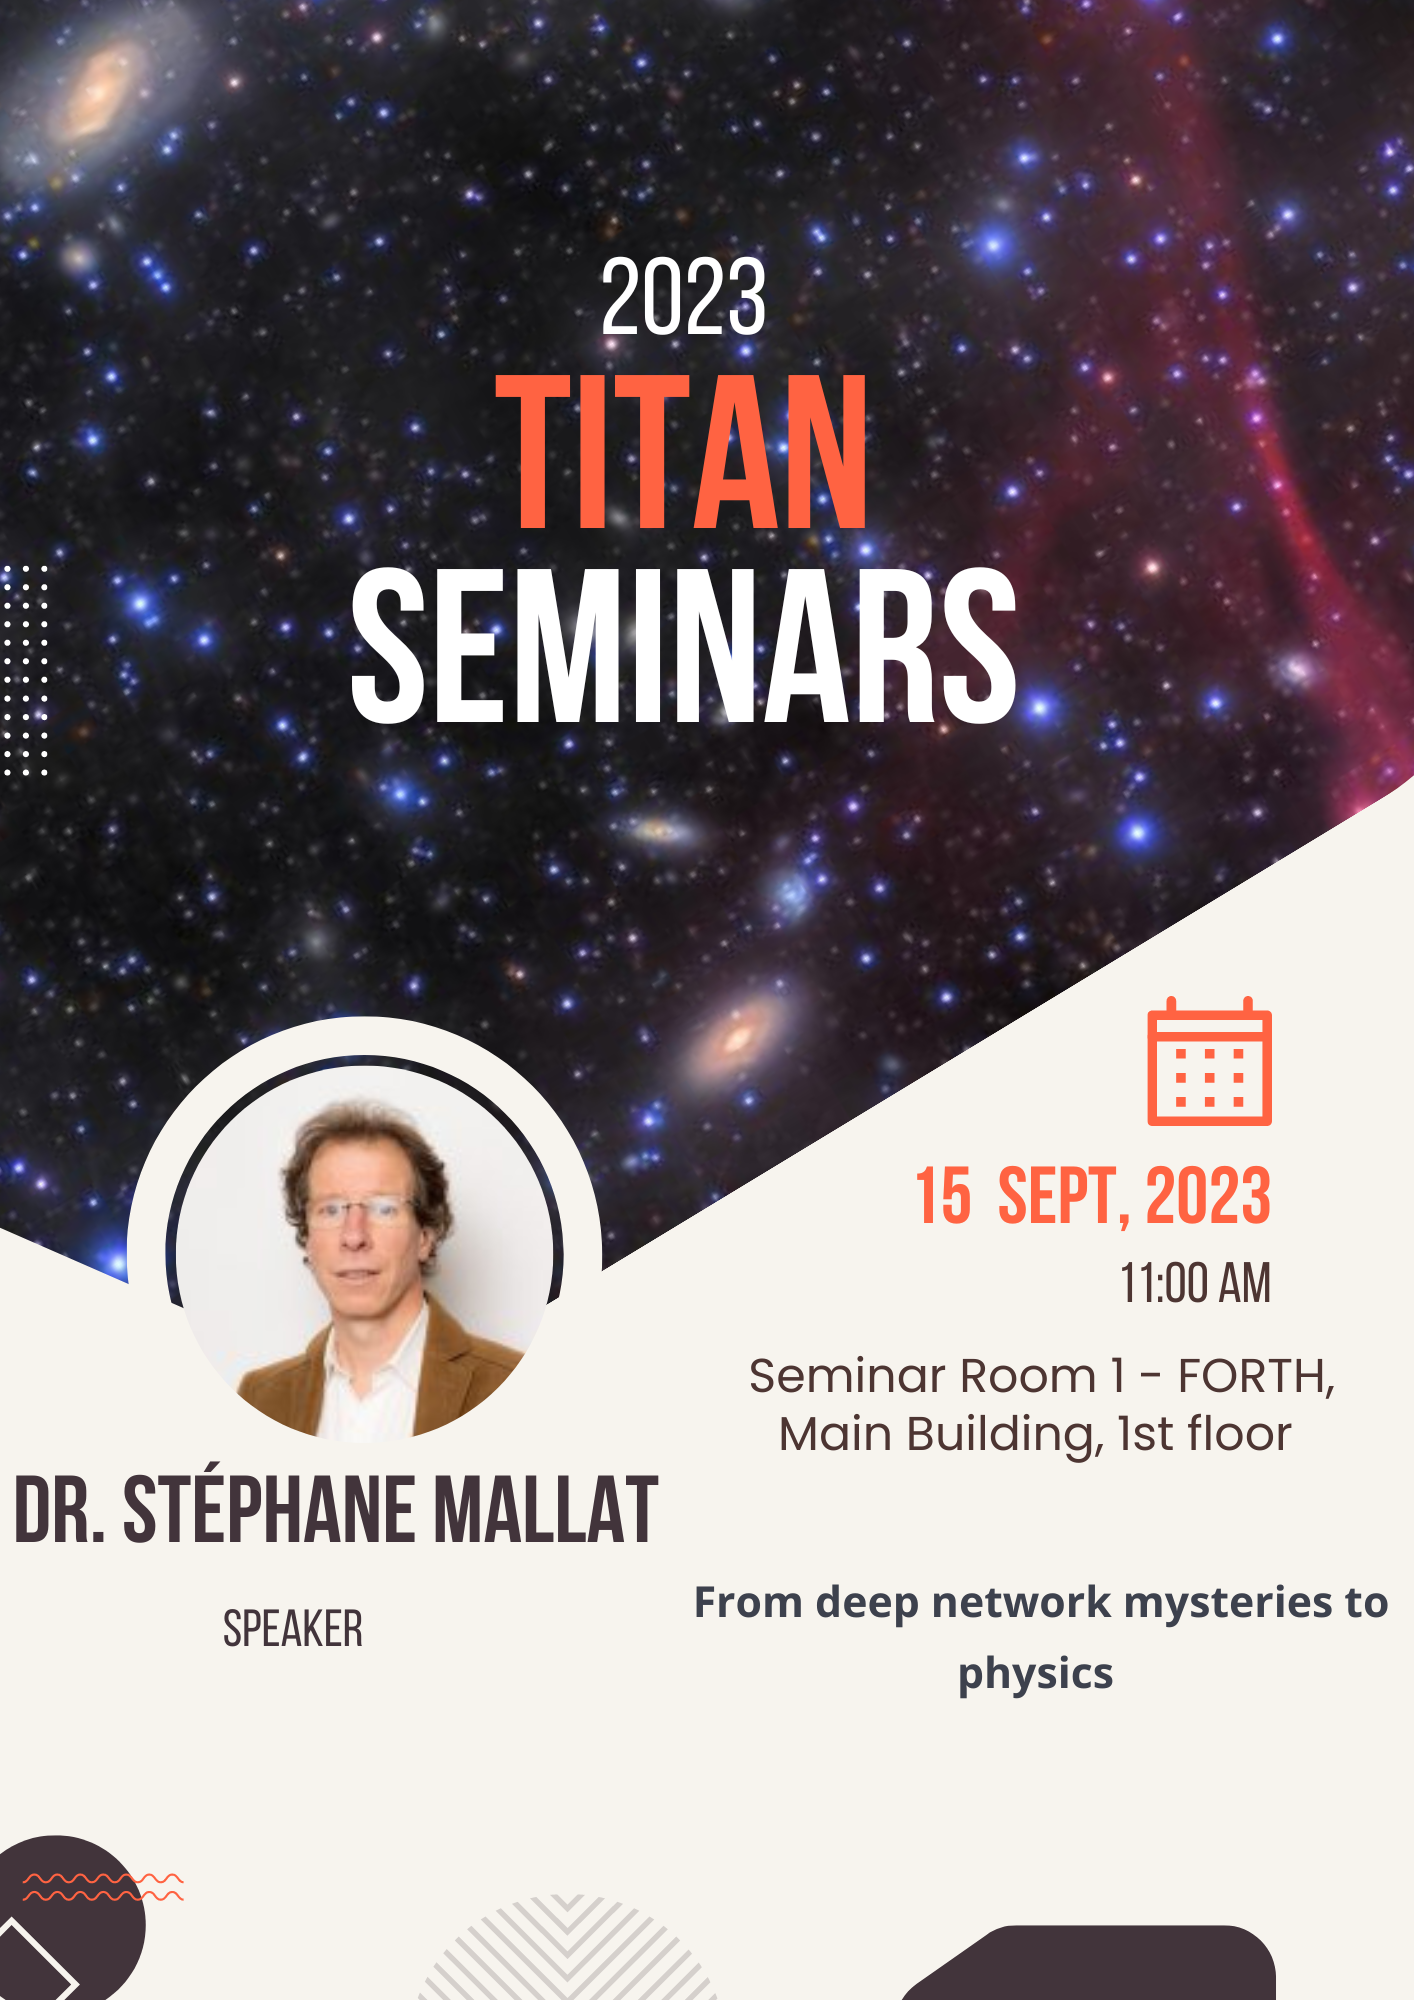 Seminar: From deep network mysteries to physics